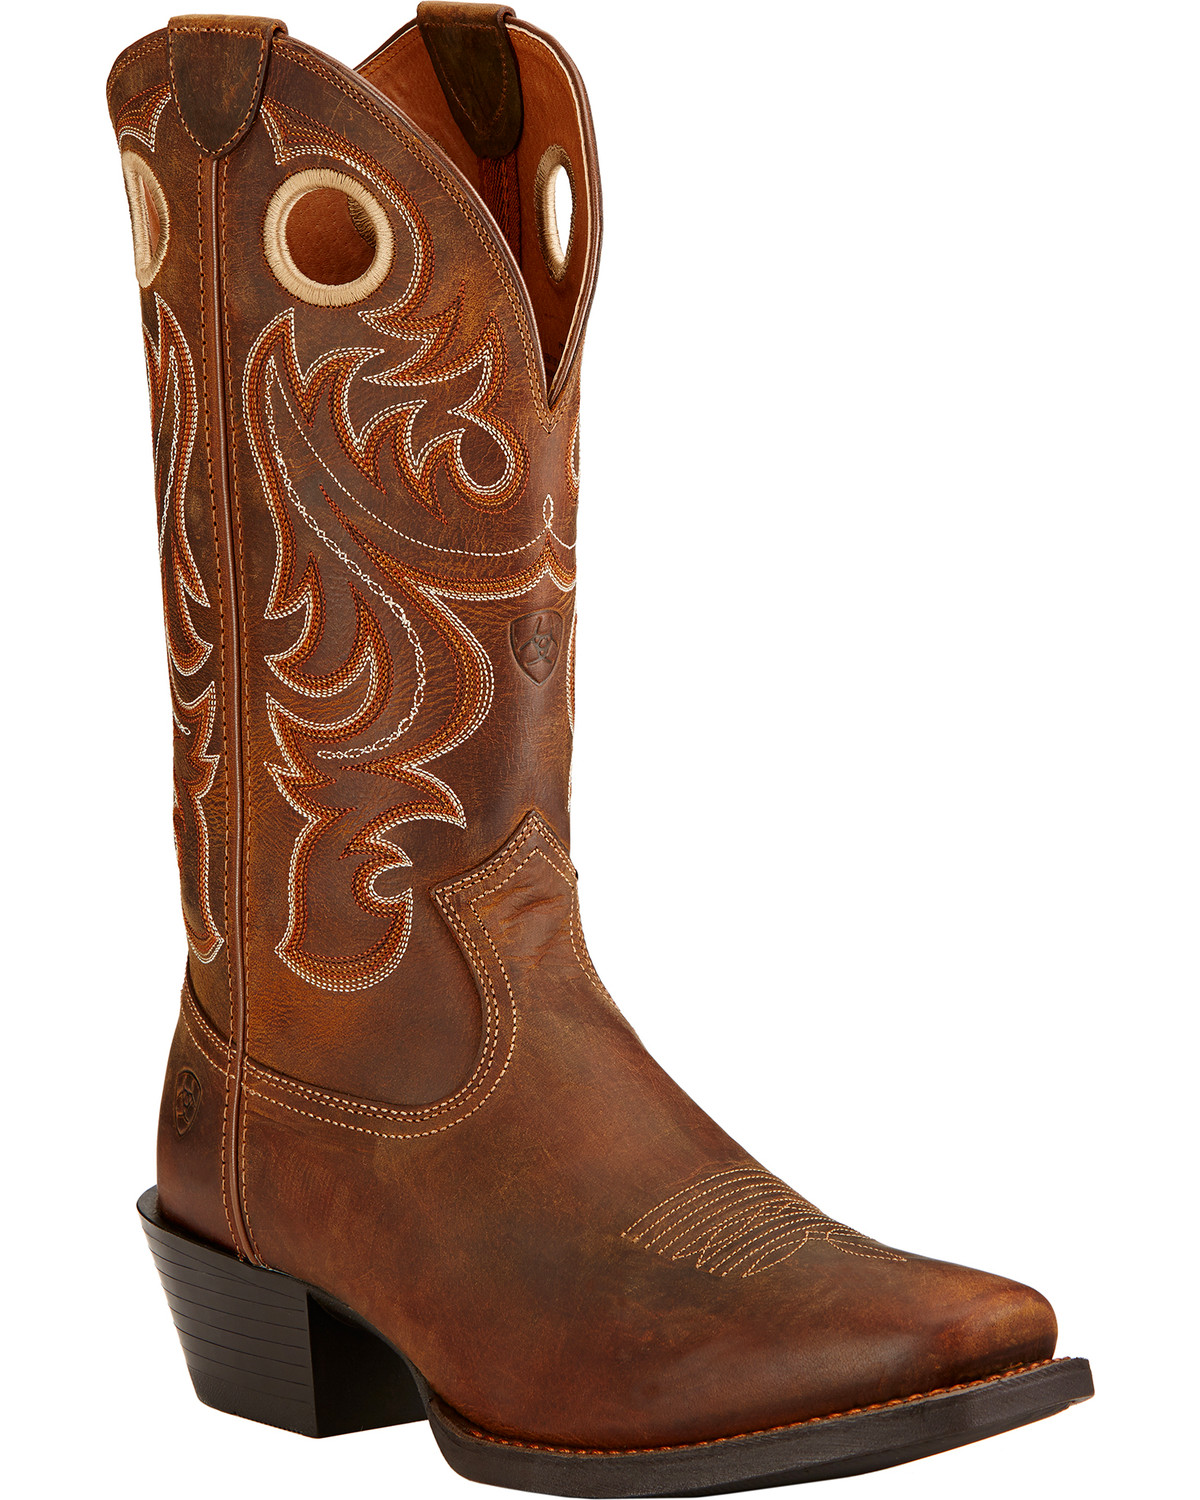 Ariat Men's Sport Western Performance Boots - Square Toe